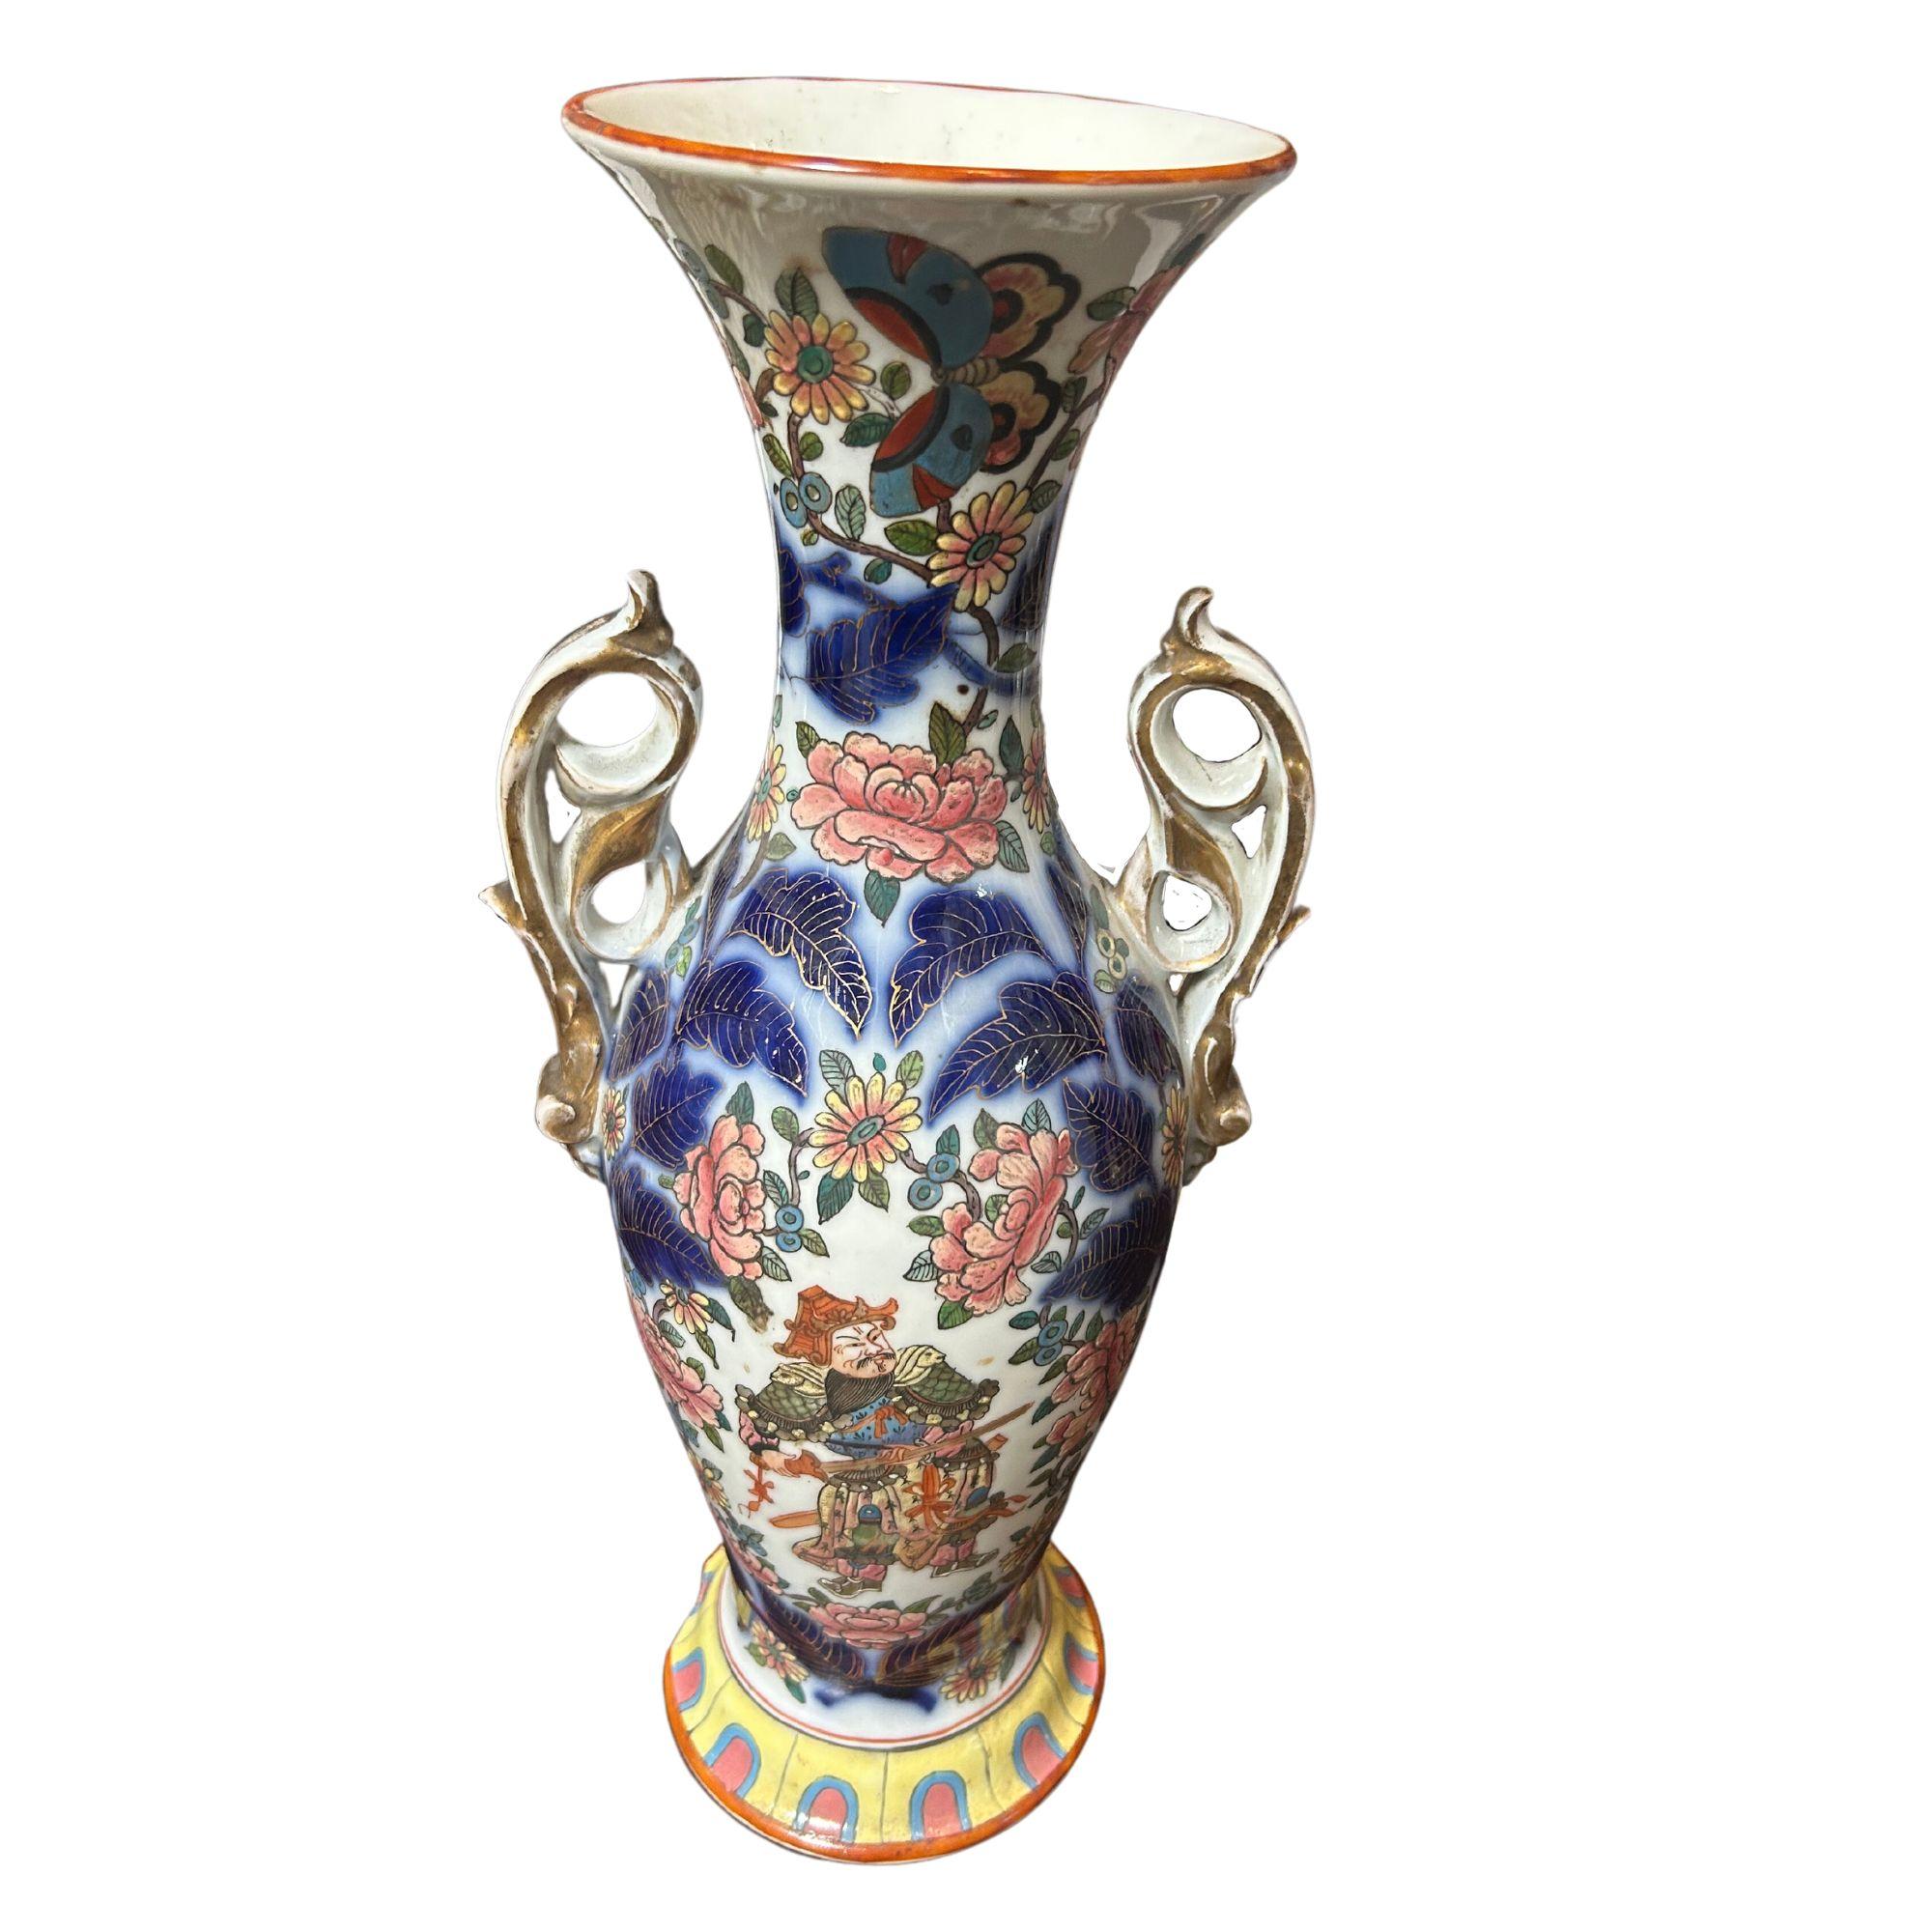 19th Century Painted Chinese Export Clobbered Ware with gold gilt accents of beautiful Chinese figures and colorful floral motifs purchased in Paris